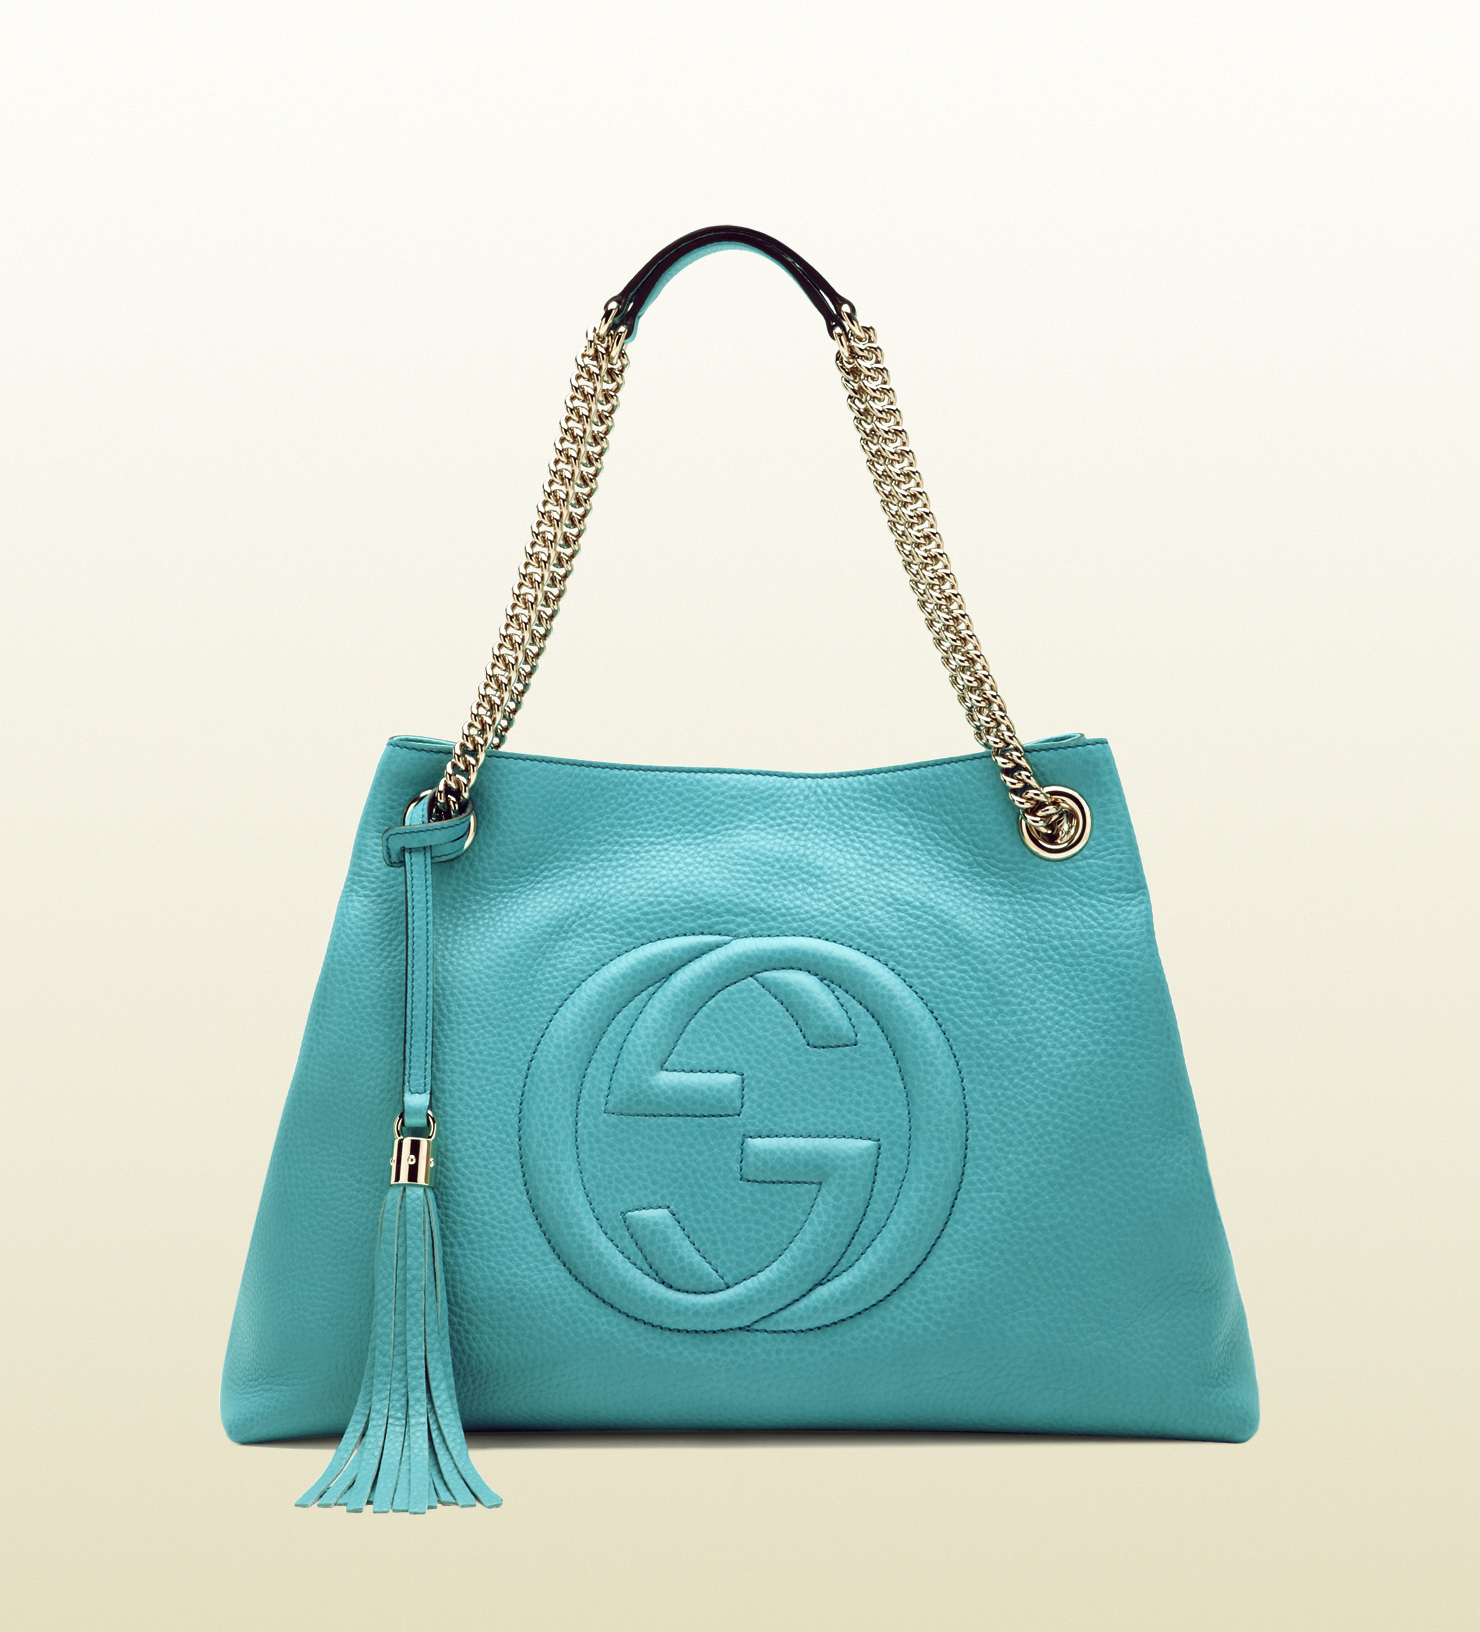 Blue Gucci Bag The Art Of Mike Mignola